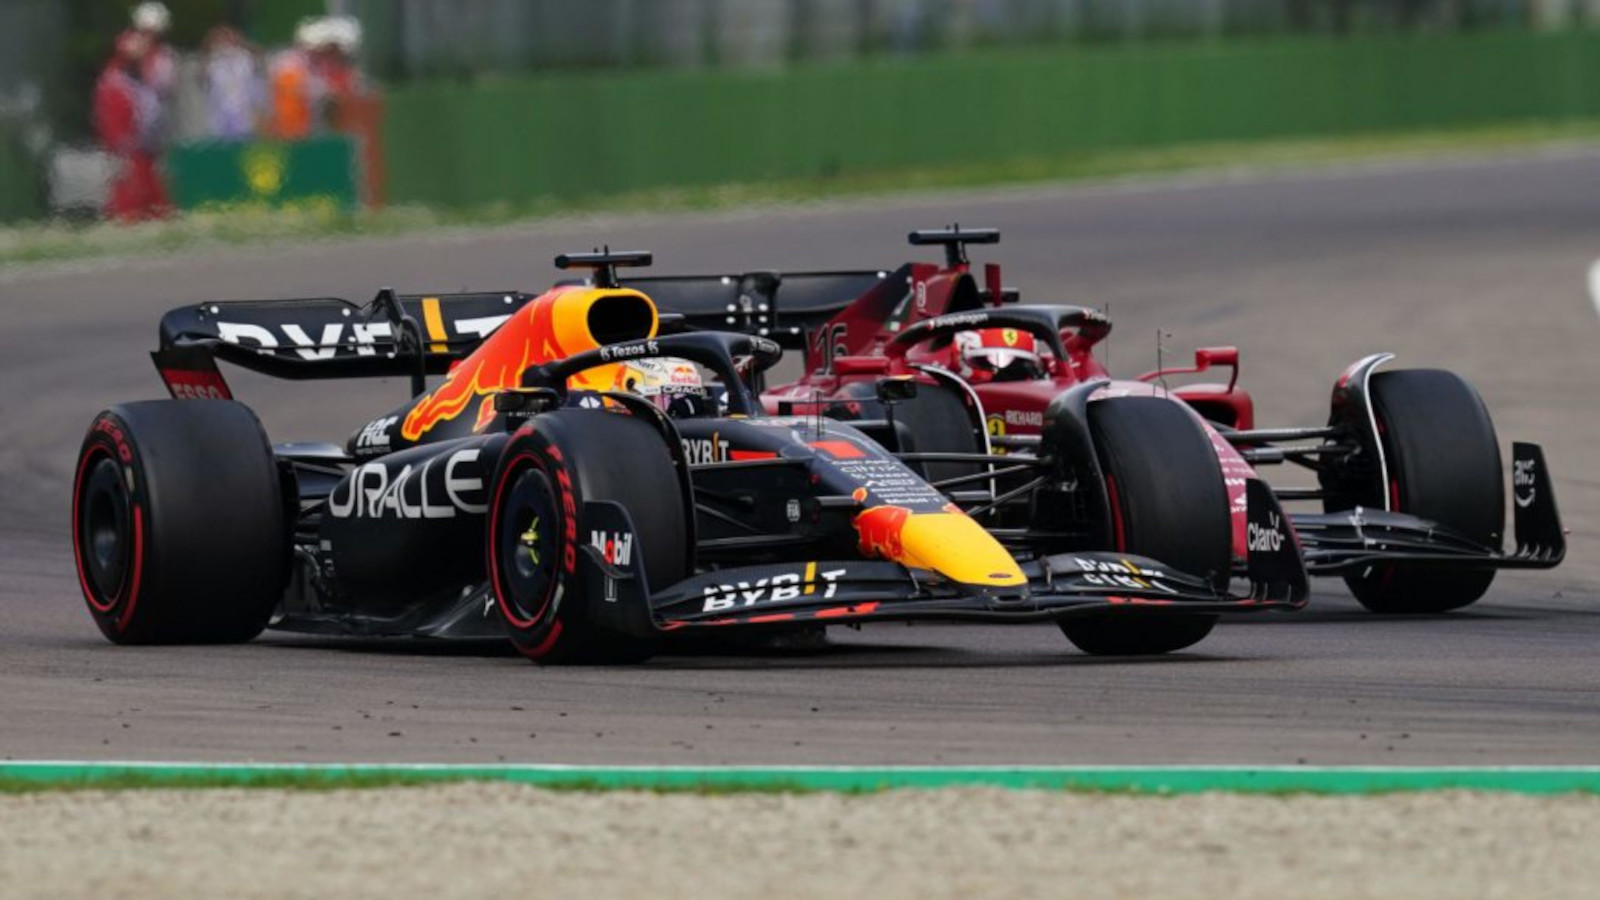 Max Verstappen as he overtakes Charles Leclerc for the lead. Imola April 2022